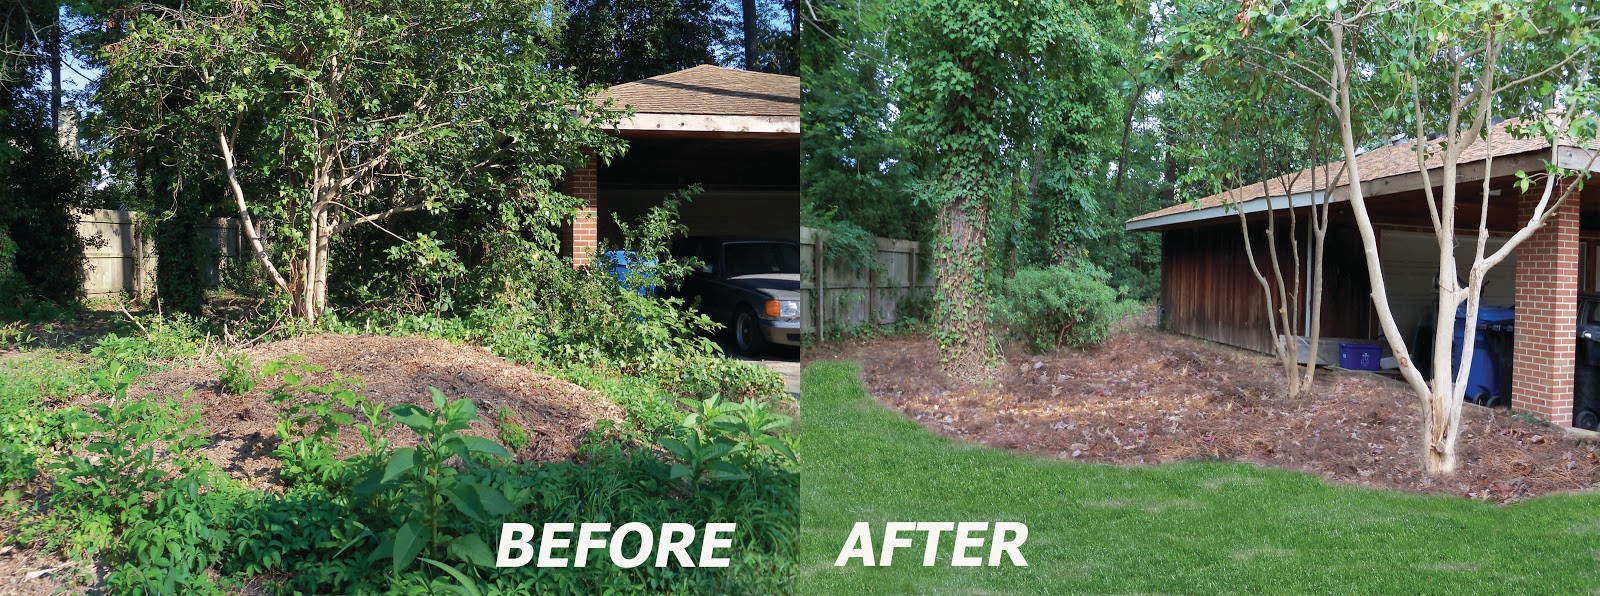 Outdoor Landscape Before And After
 Dr Dan s Garden Tips Before and After